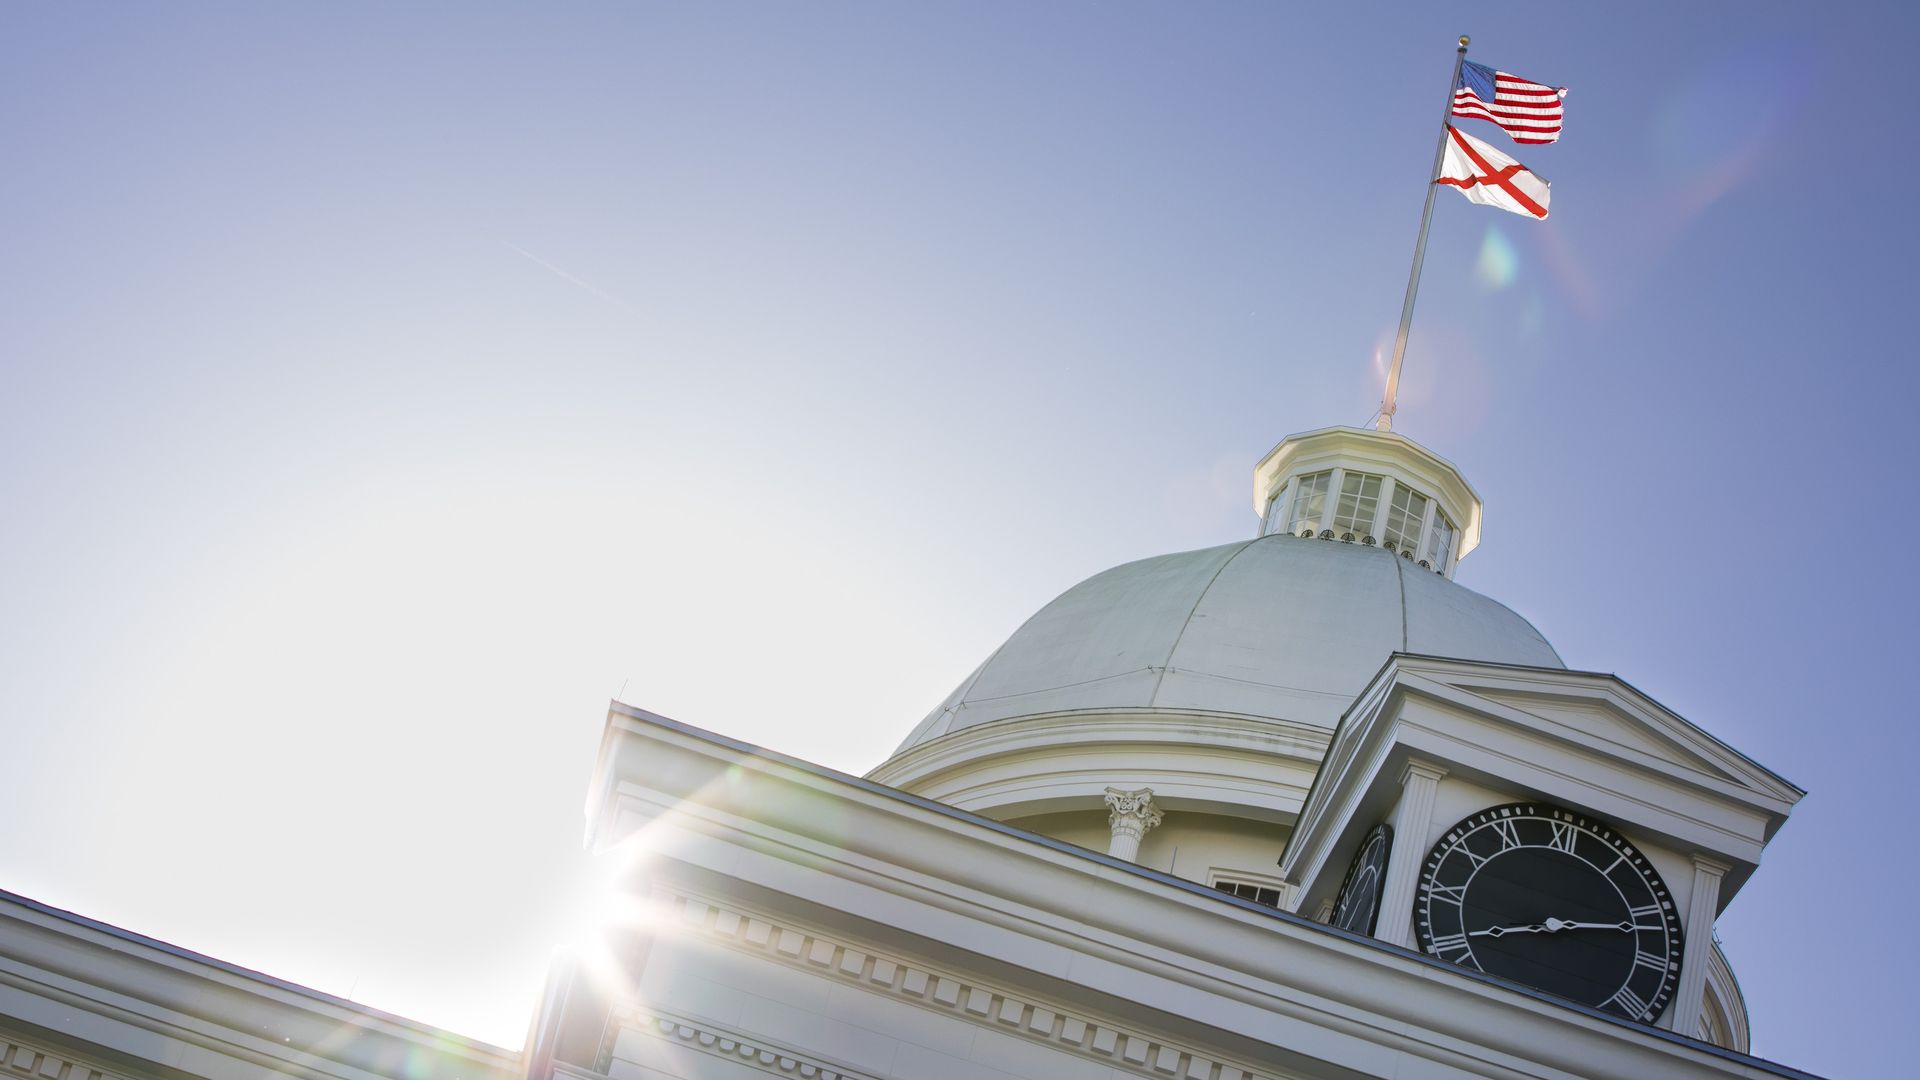 The flag of Alabama below the U.S. flag fly over a Montgomery Statehouse.